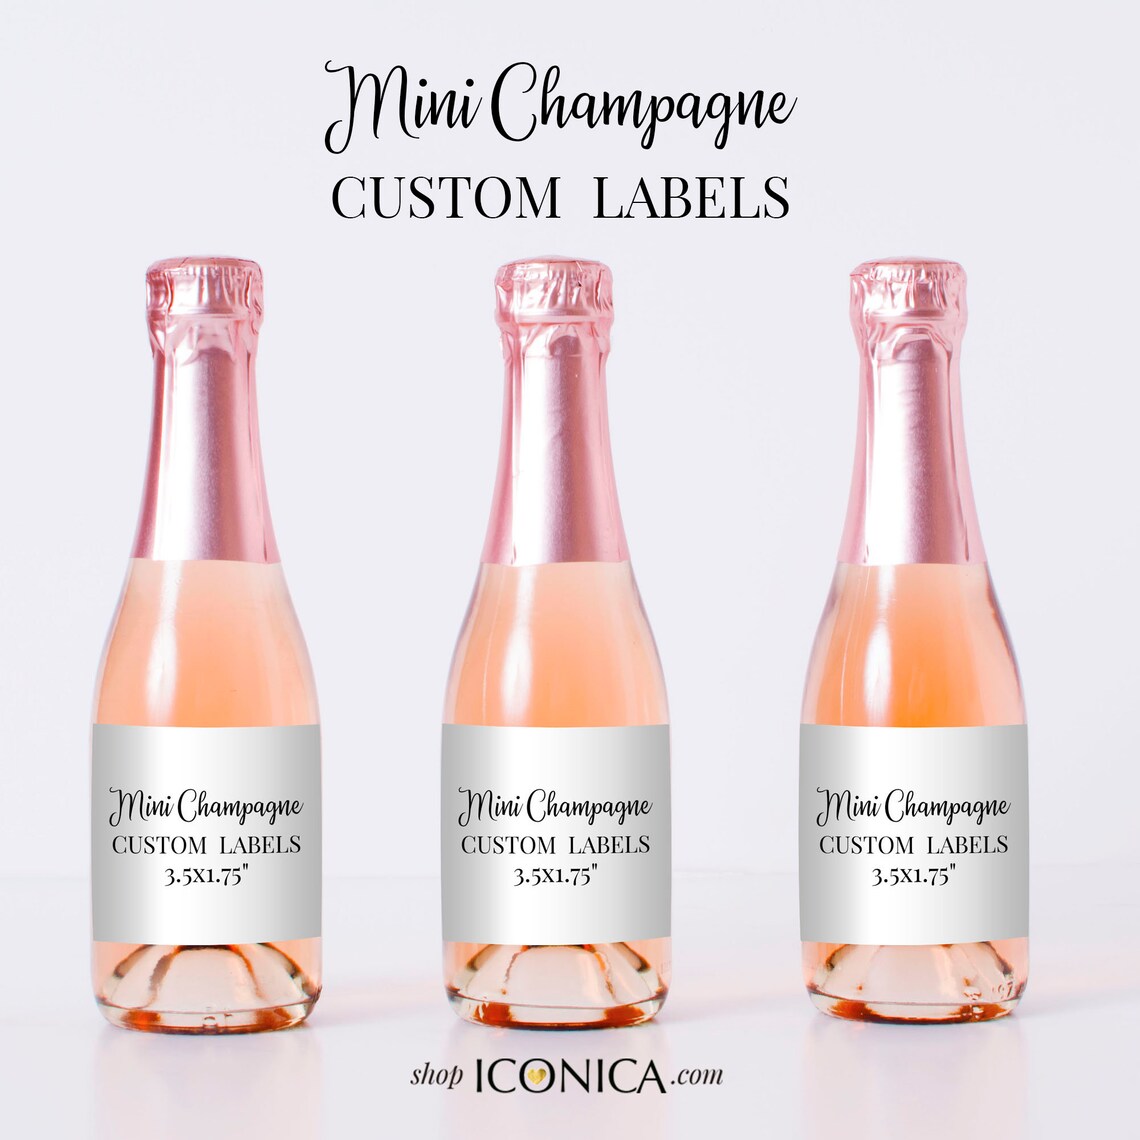 Mini Champagne Labels: A Guide to Choosing the Right Label Size